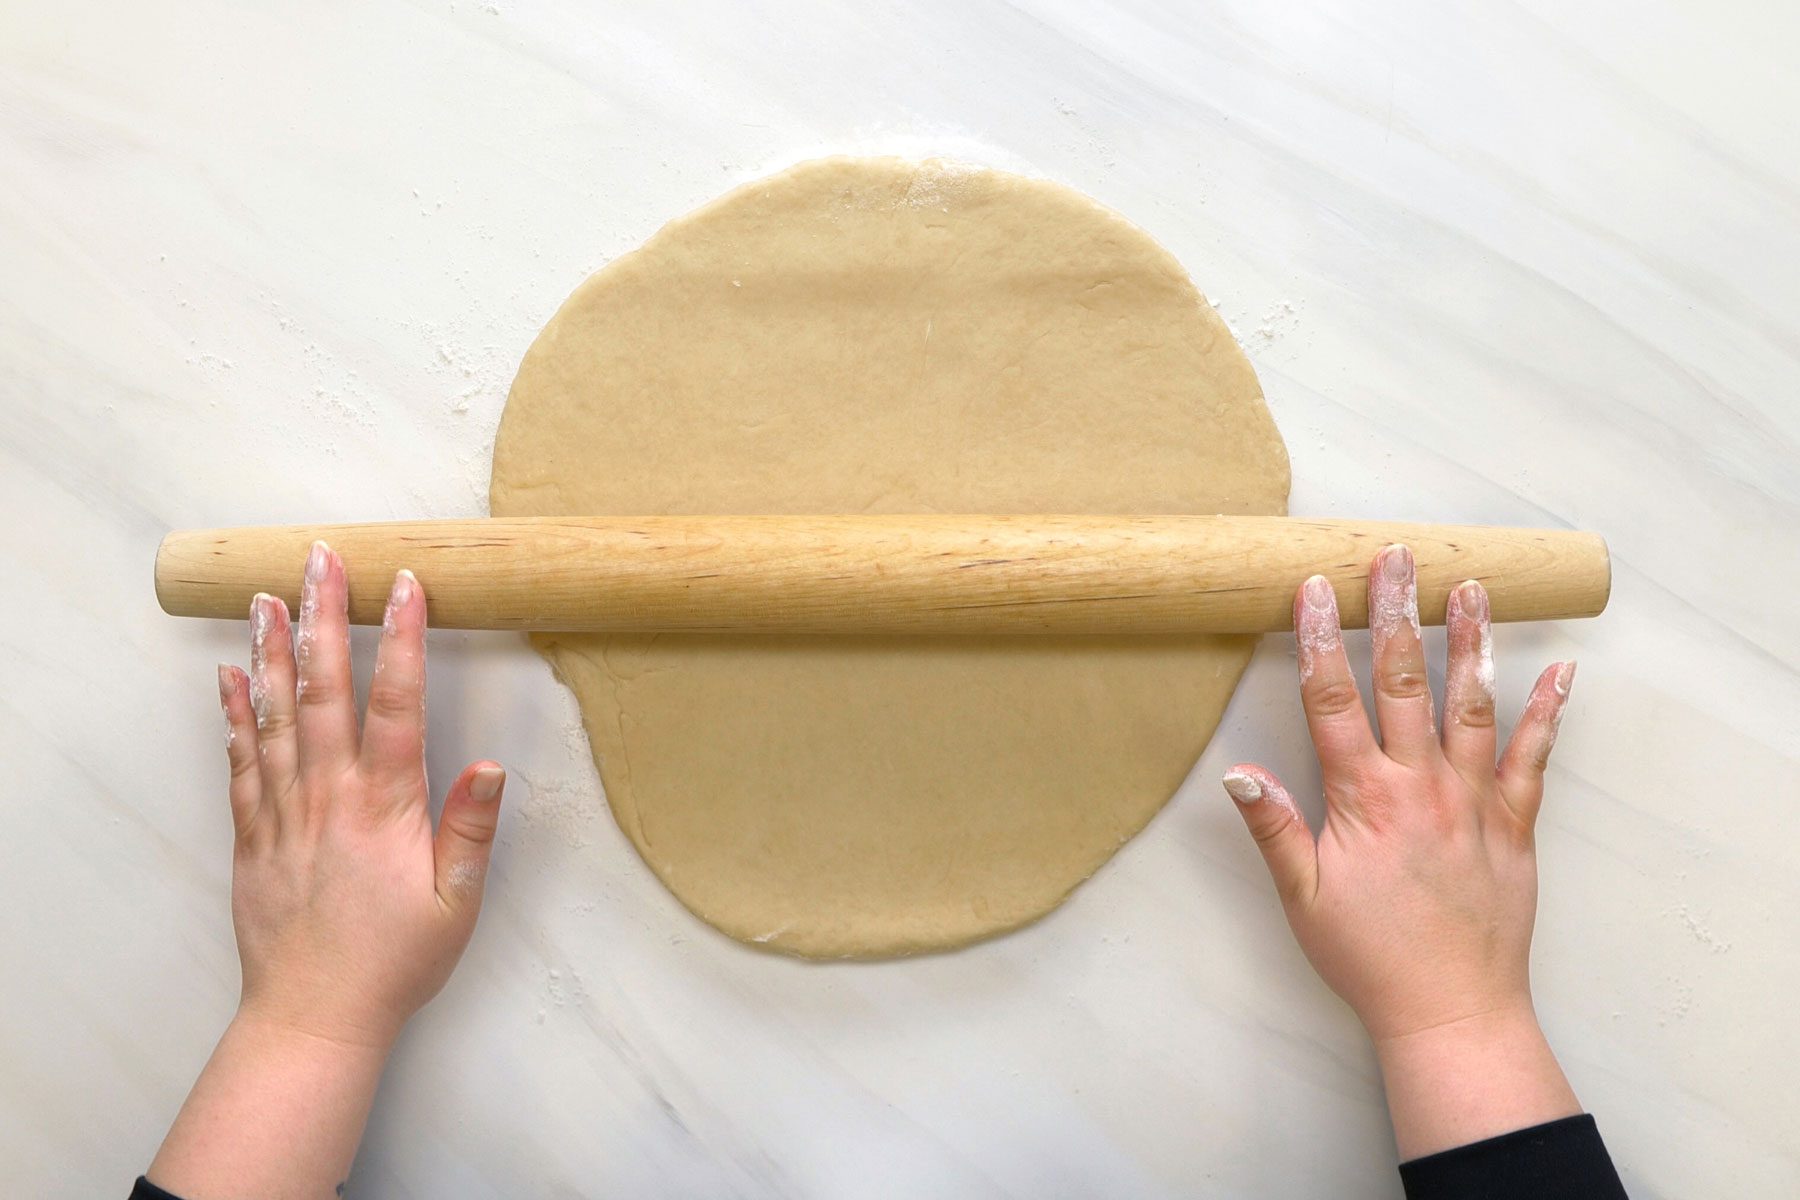 A person rolling the dough on a marble surface